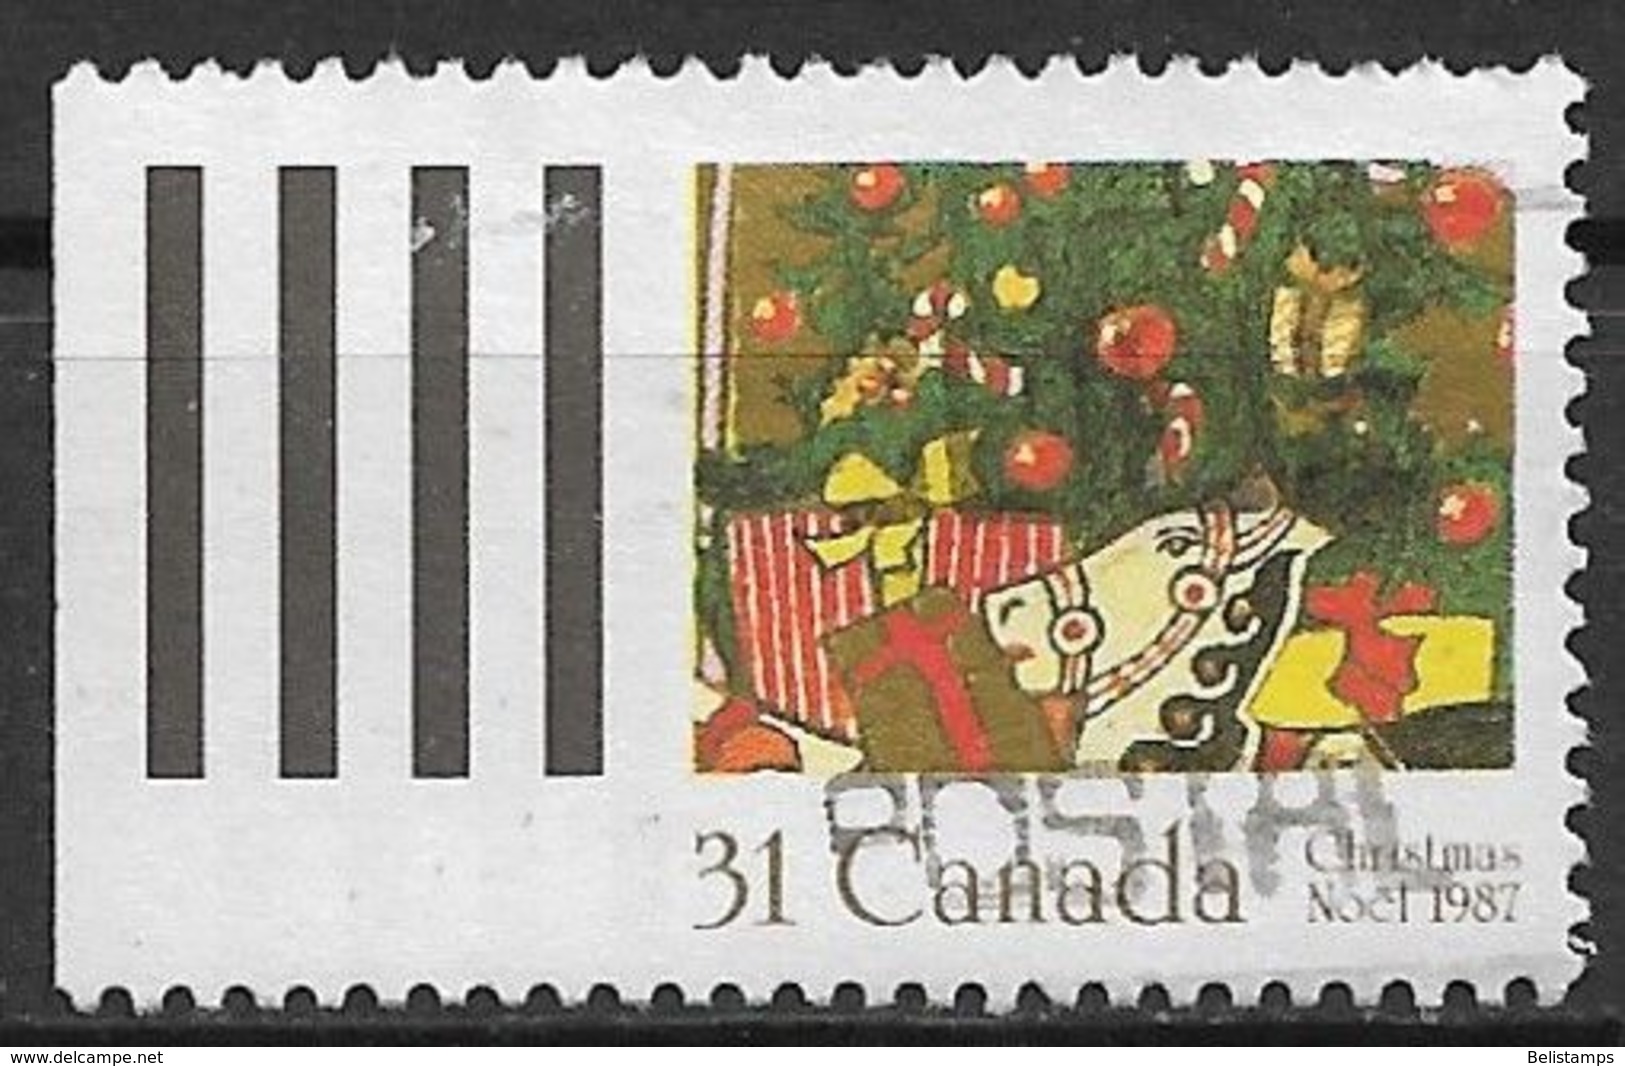 Canada 1987. Scott #1151 (U) Christmas, Gifts And Tree - Timbres Seuls